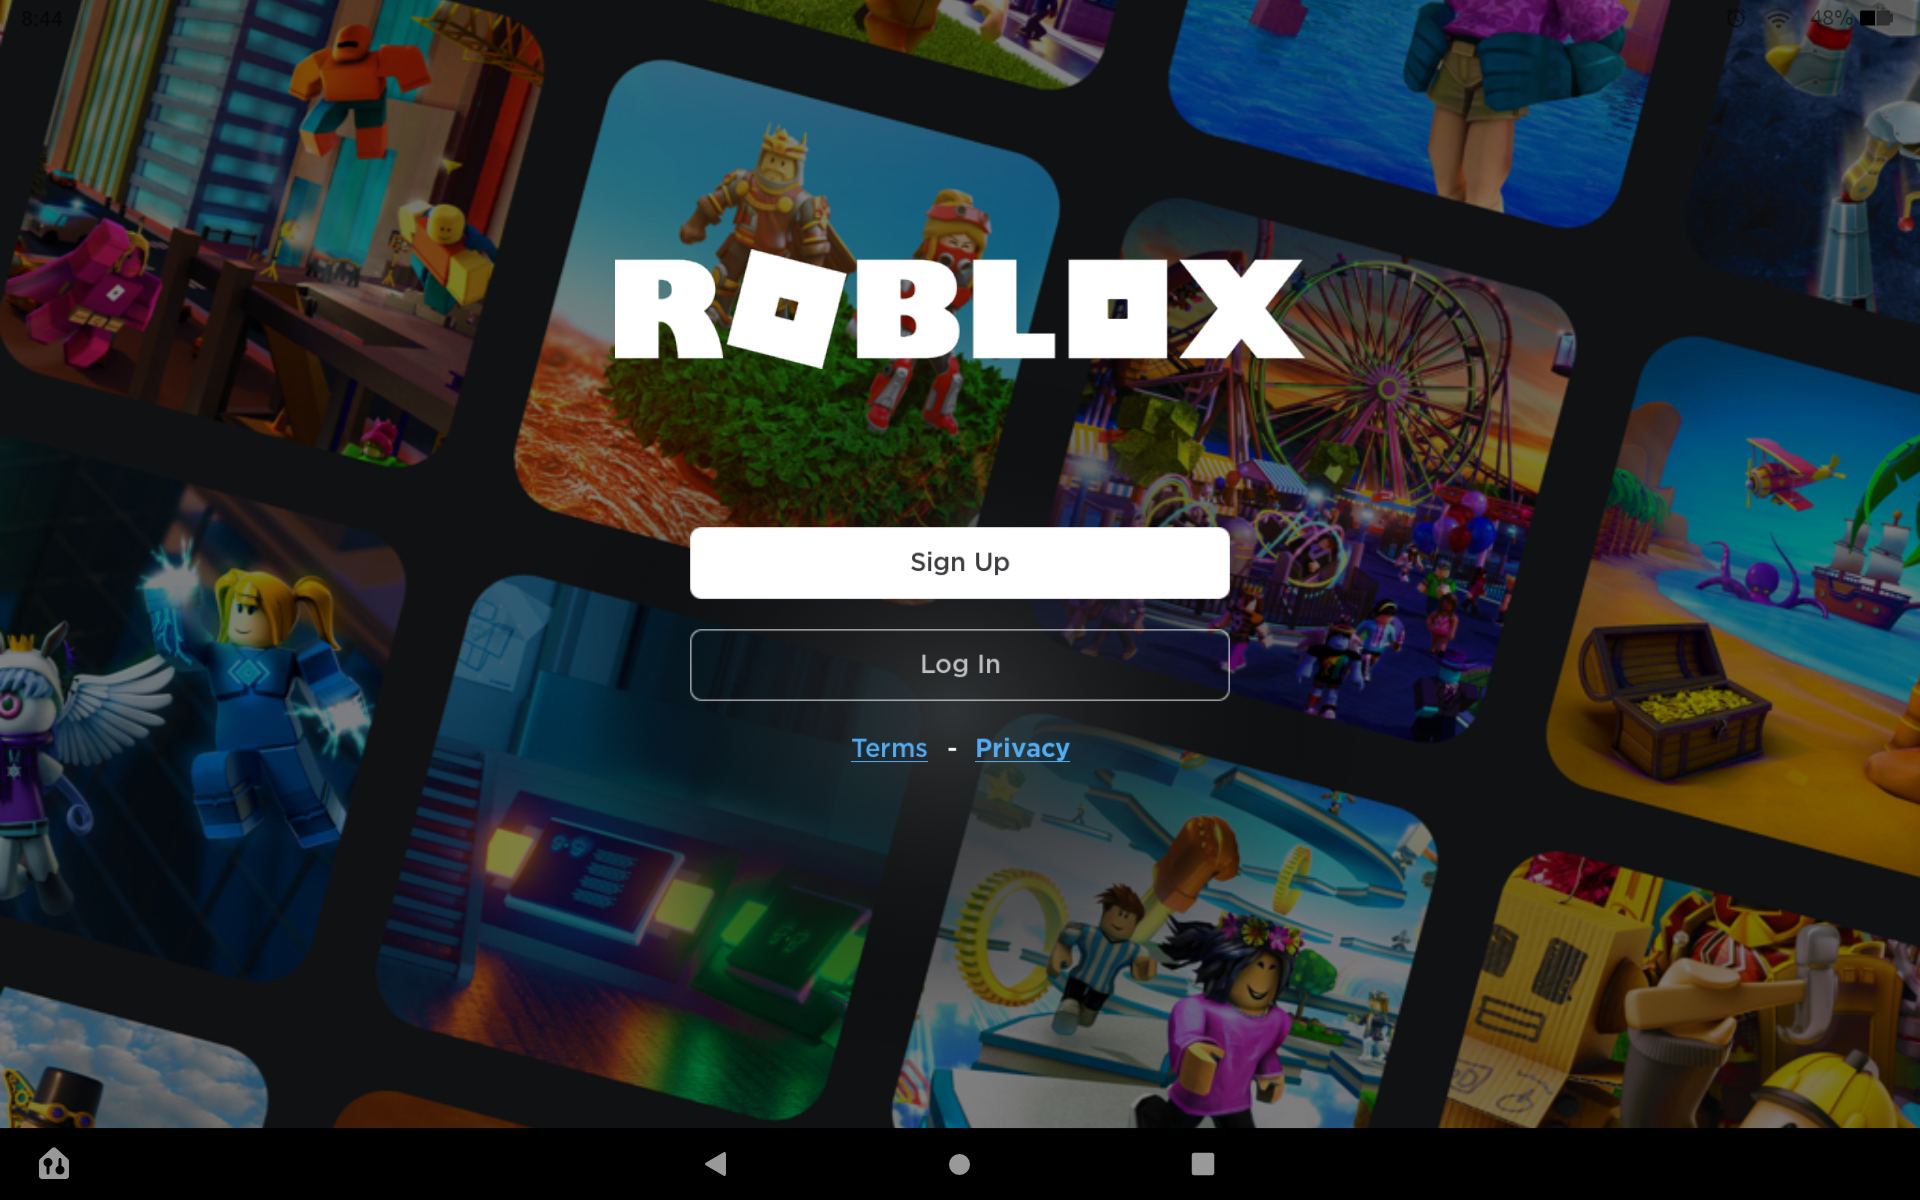 Roblox complaint Locked out.